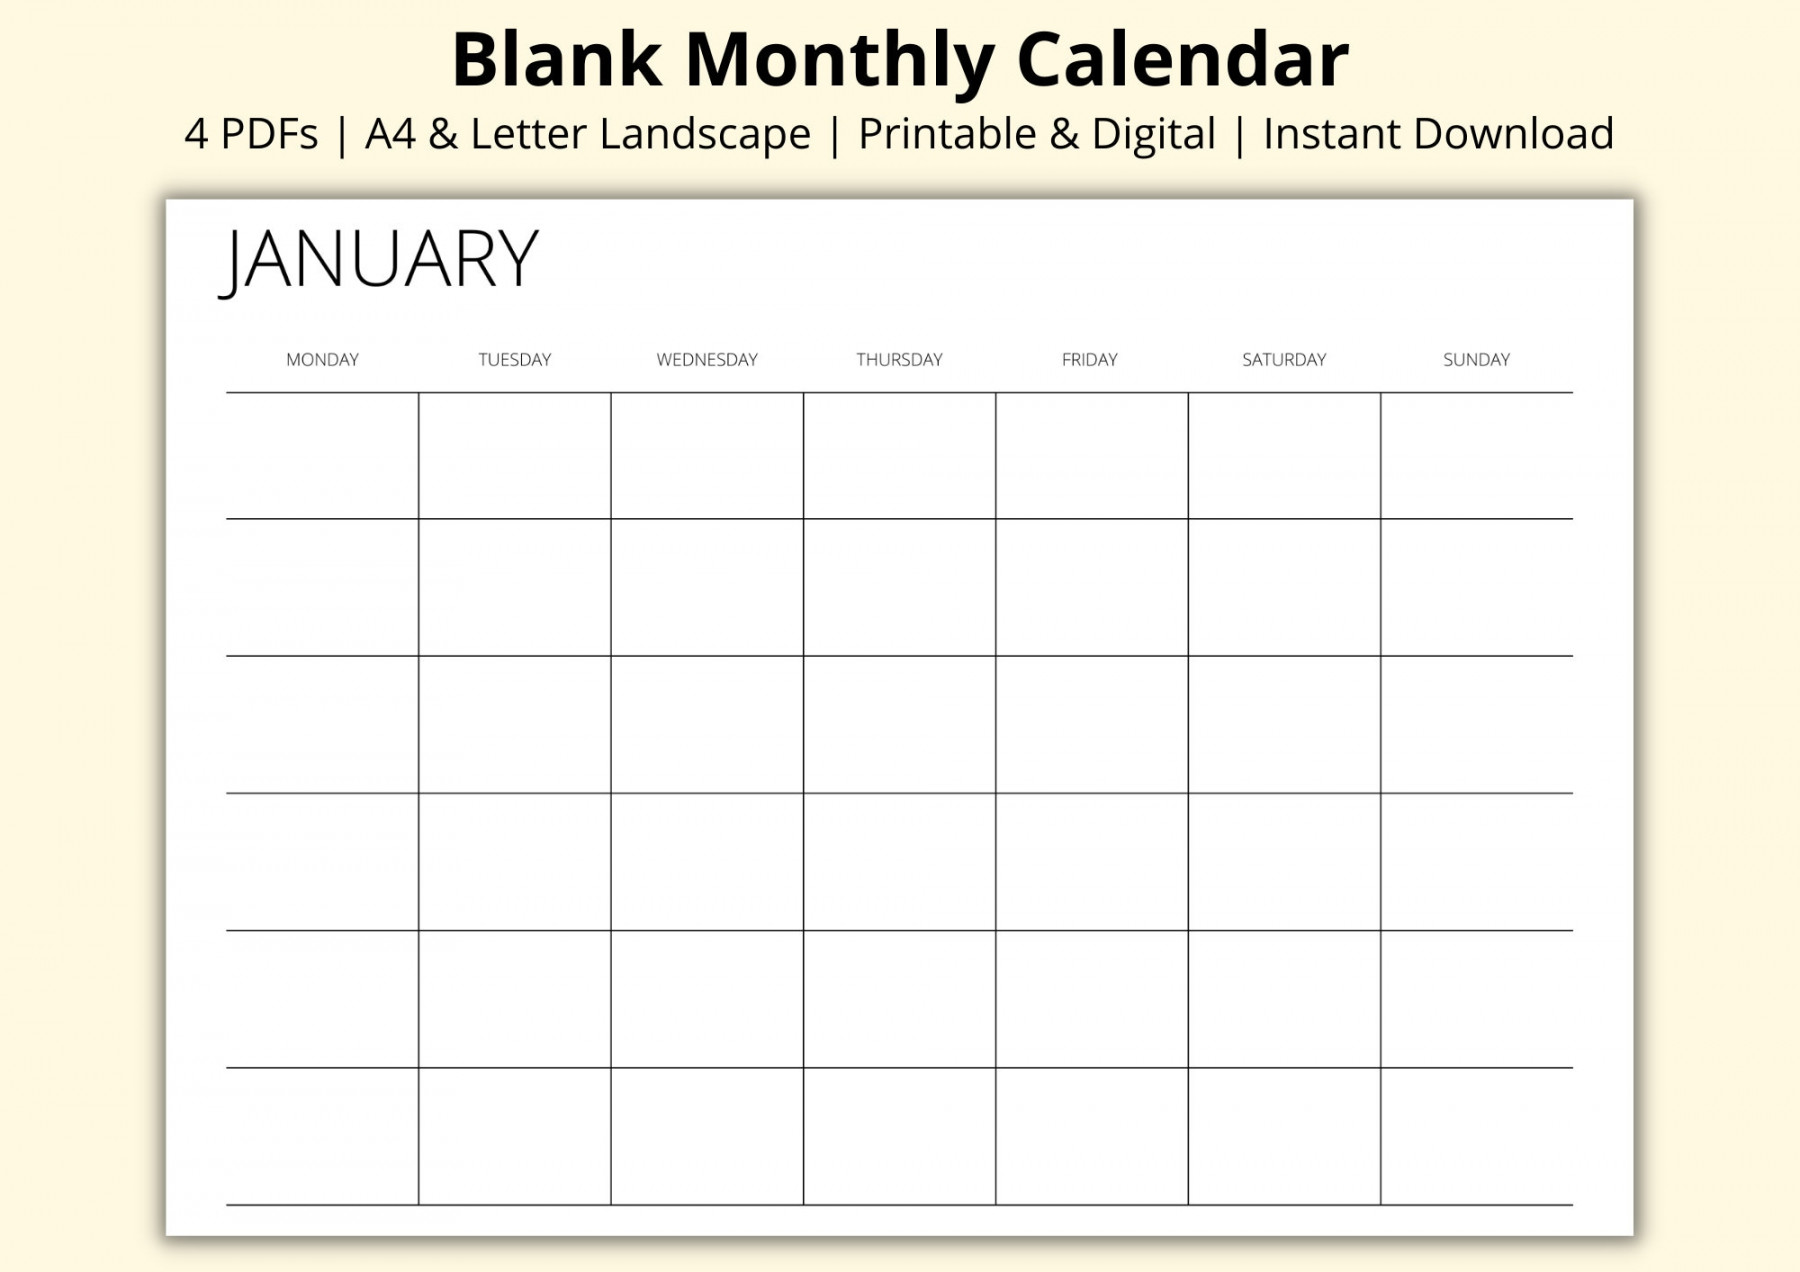 Blank Monthly Calendar Template  Month Calendar Pages - Etsy Norway